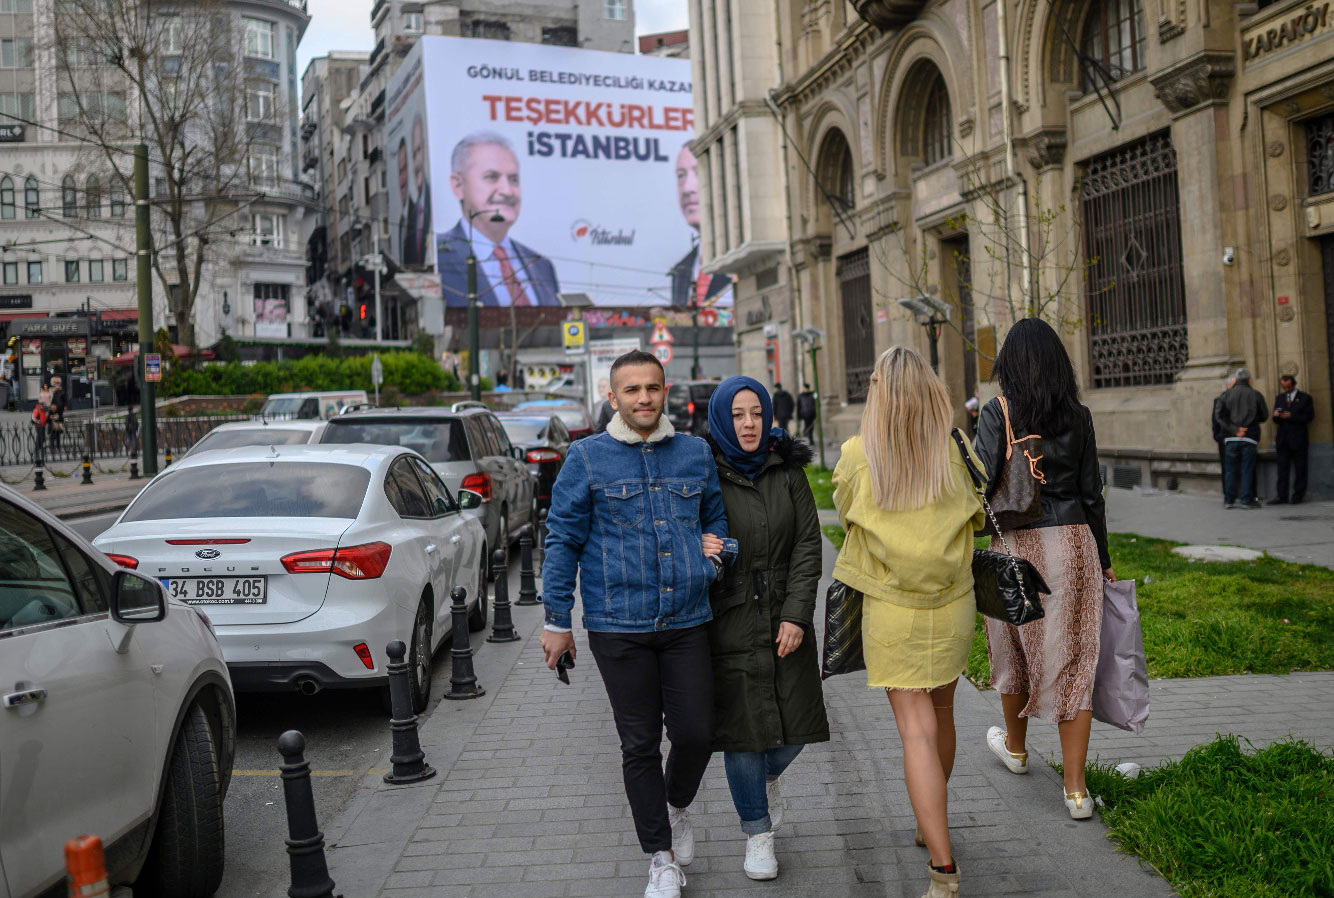 People go about their daily life next to a billboard reading "Thank You Istanbul" and portraying AKP ruling party mayor candidate Binali Yildirim and President Recep Tayyip Erdogan, in Istanbul, on April 2, 2019.